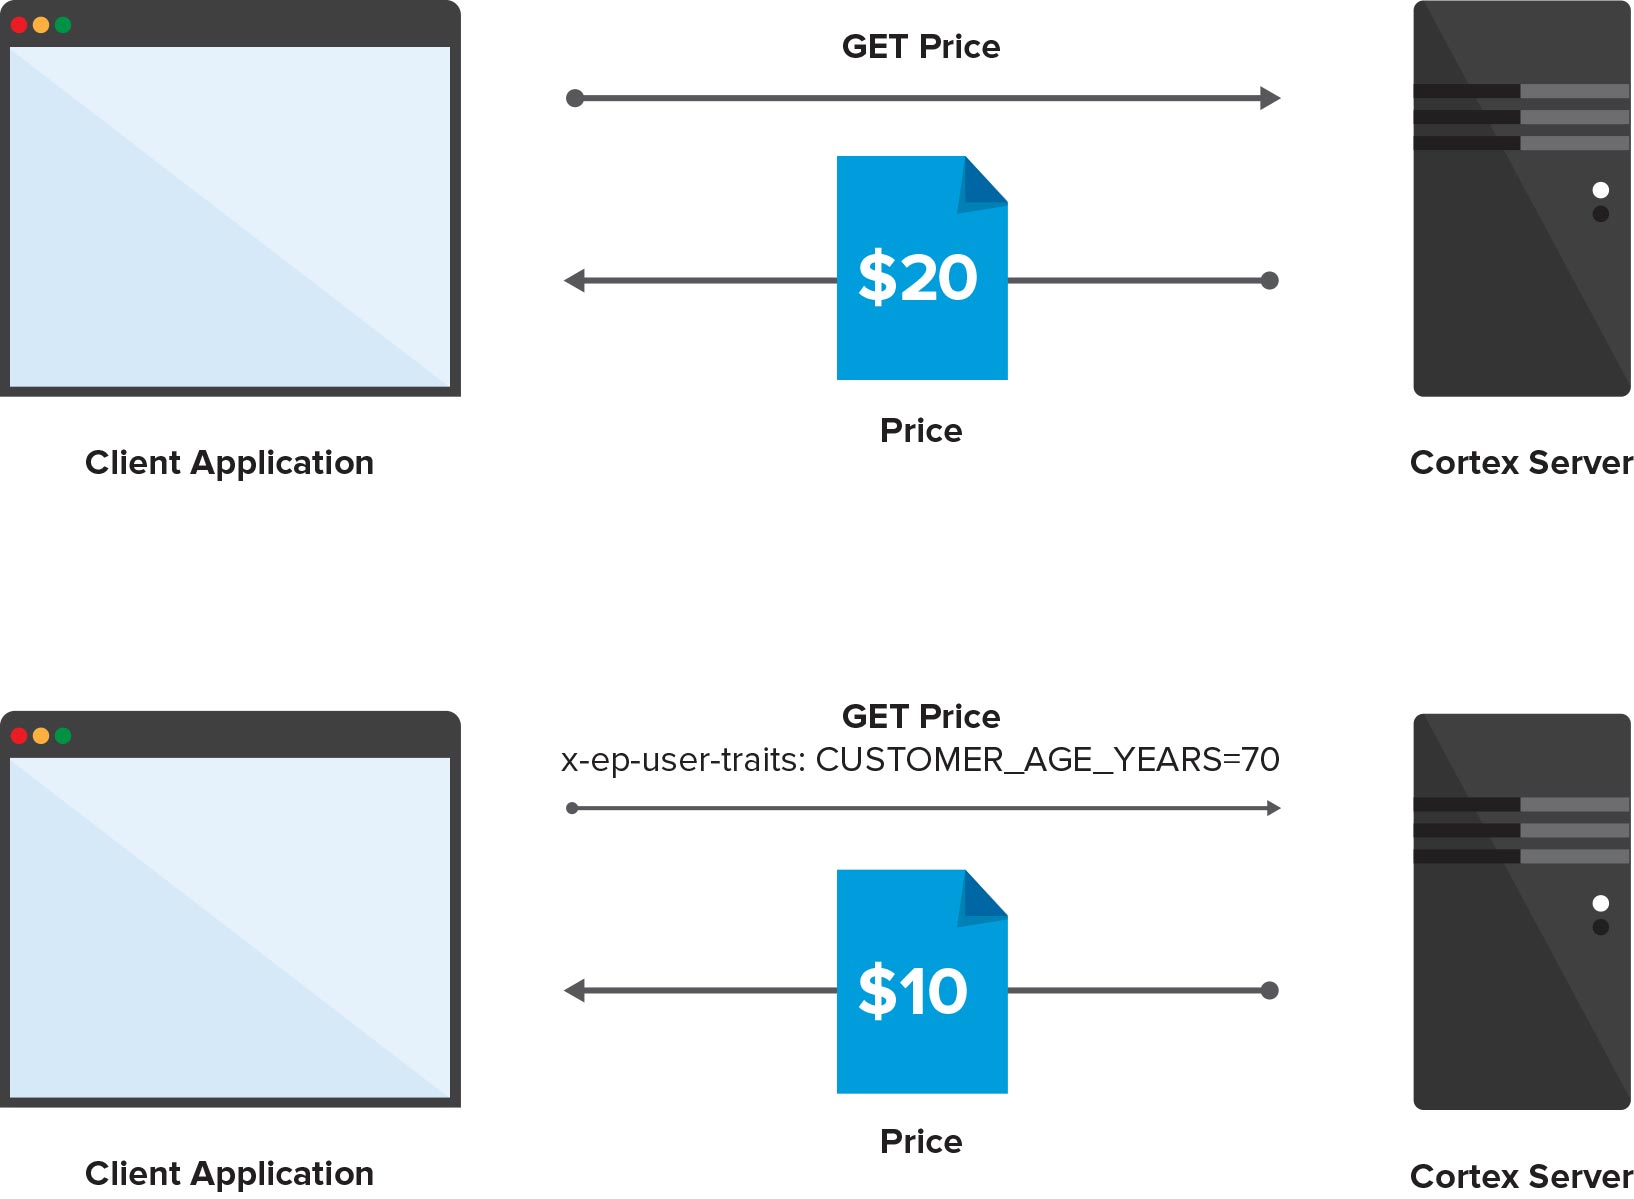 Pricing affected when a client application passes shopper traits